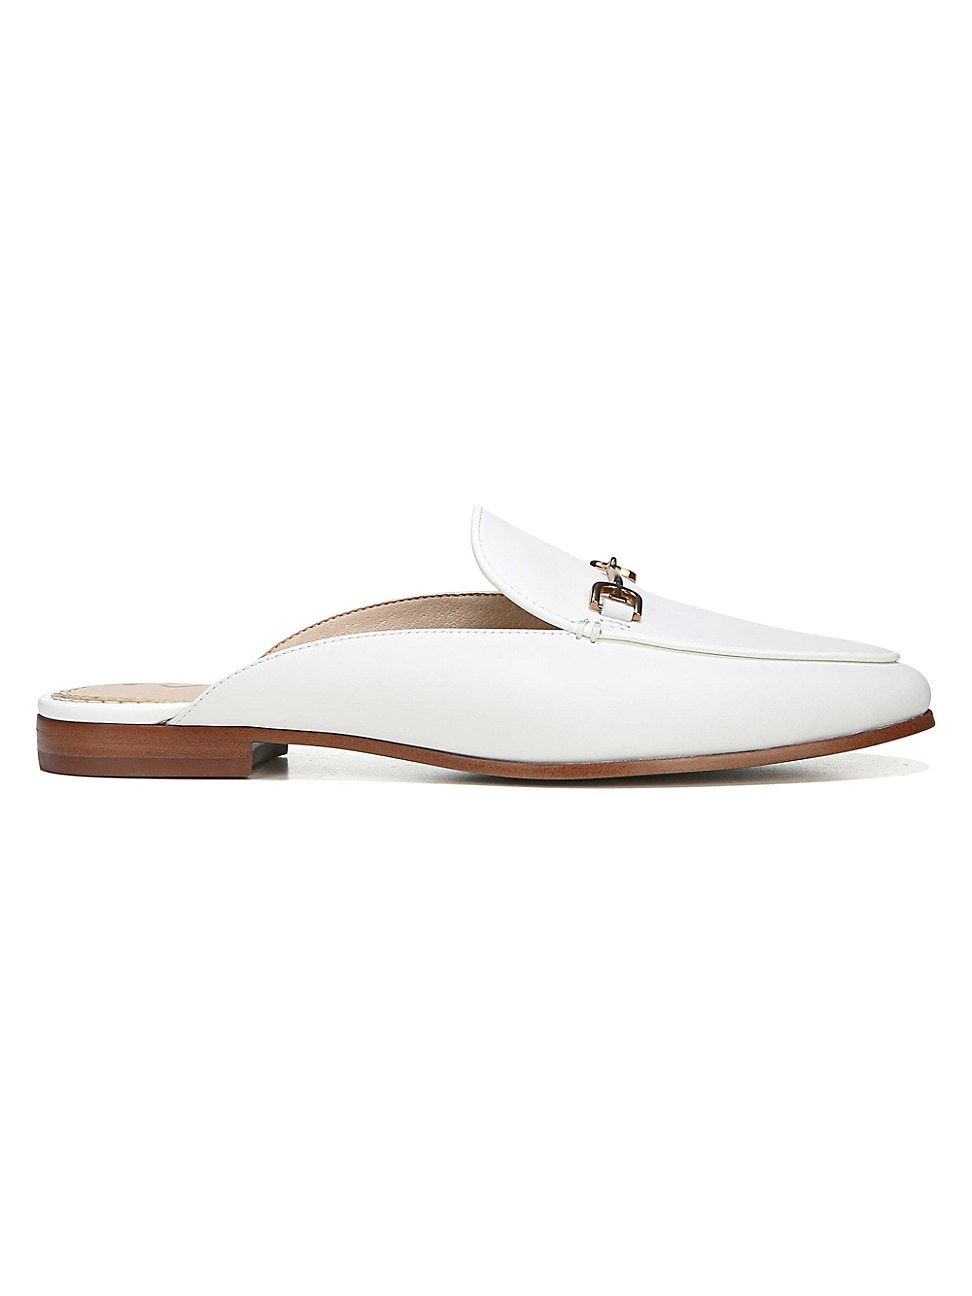 Women's Linnie Leather Loafer Mules - White - Size 4.5 | Saks Fifth Avenue